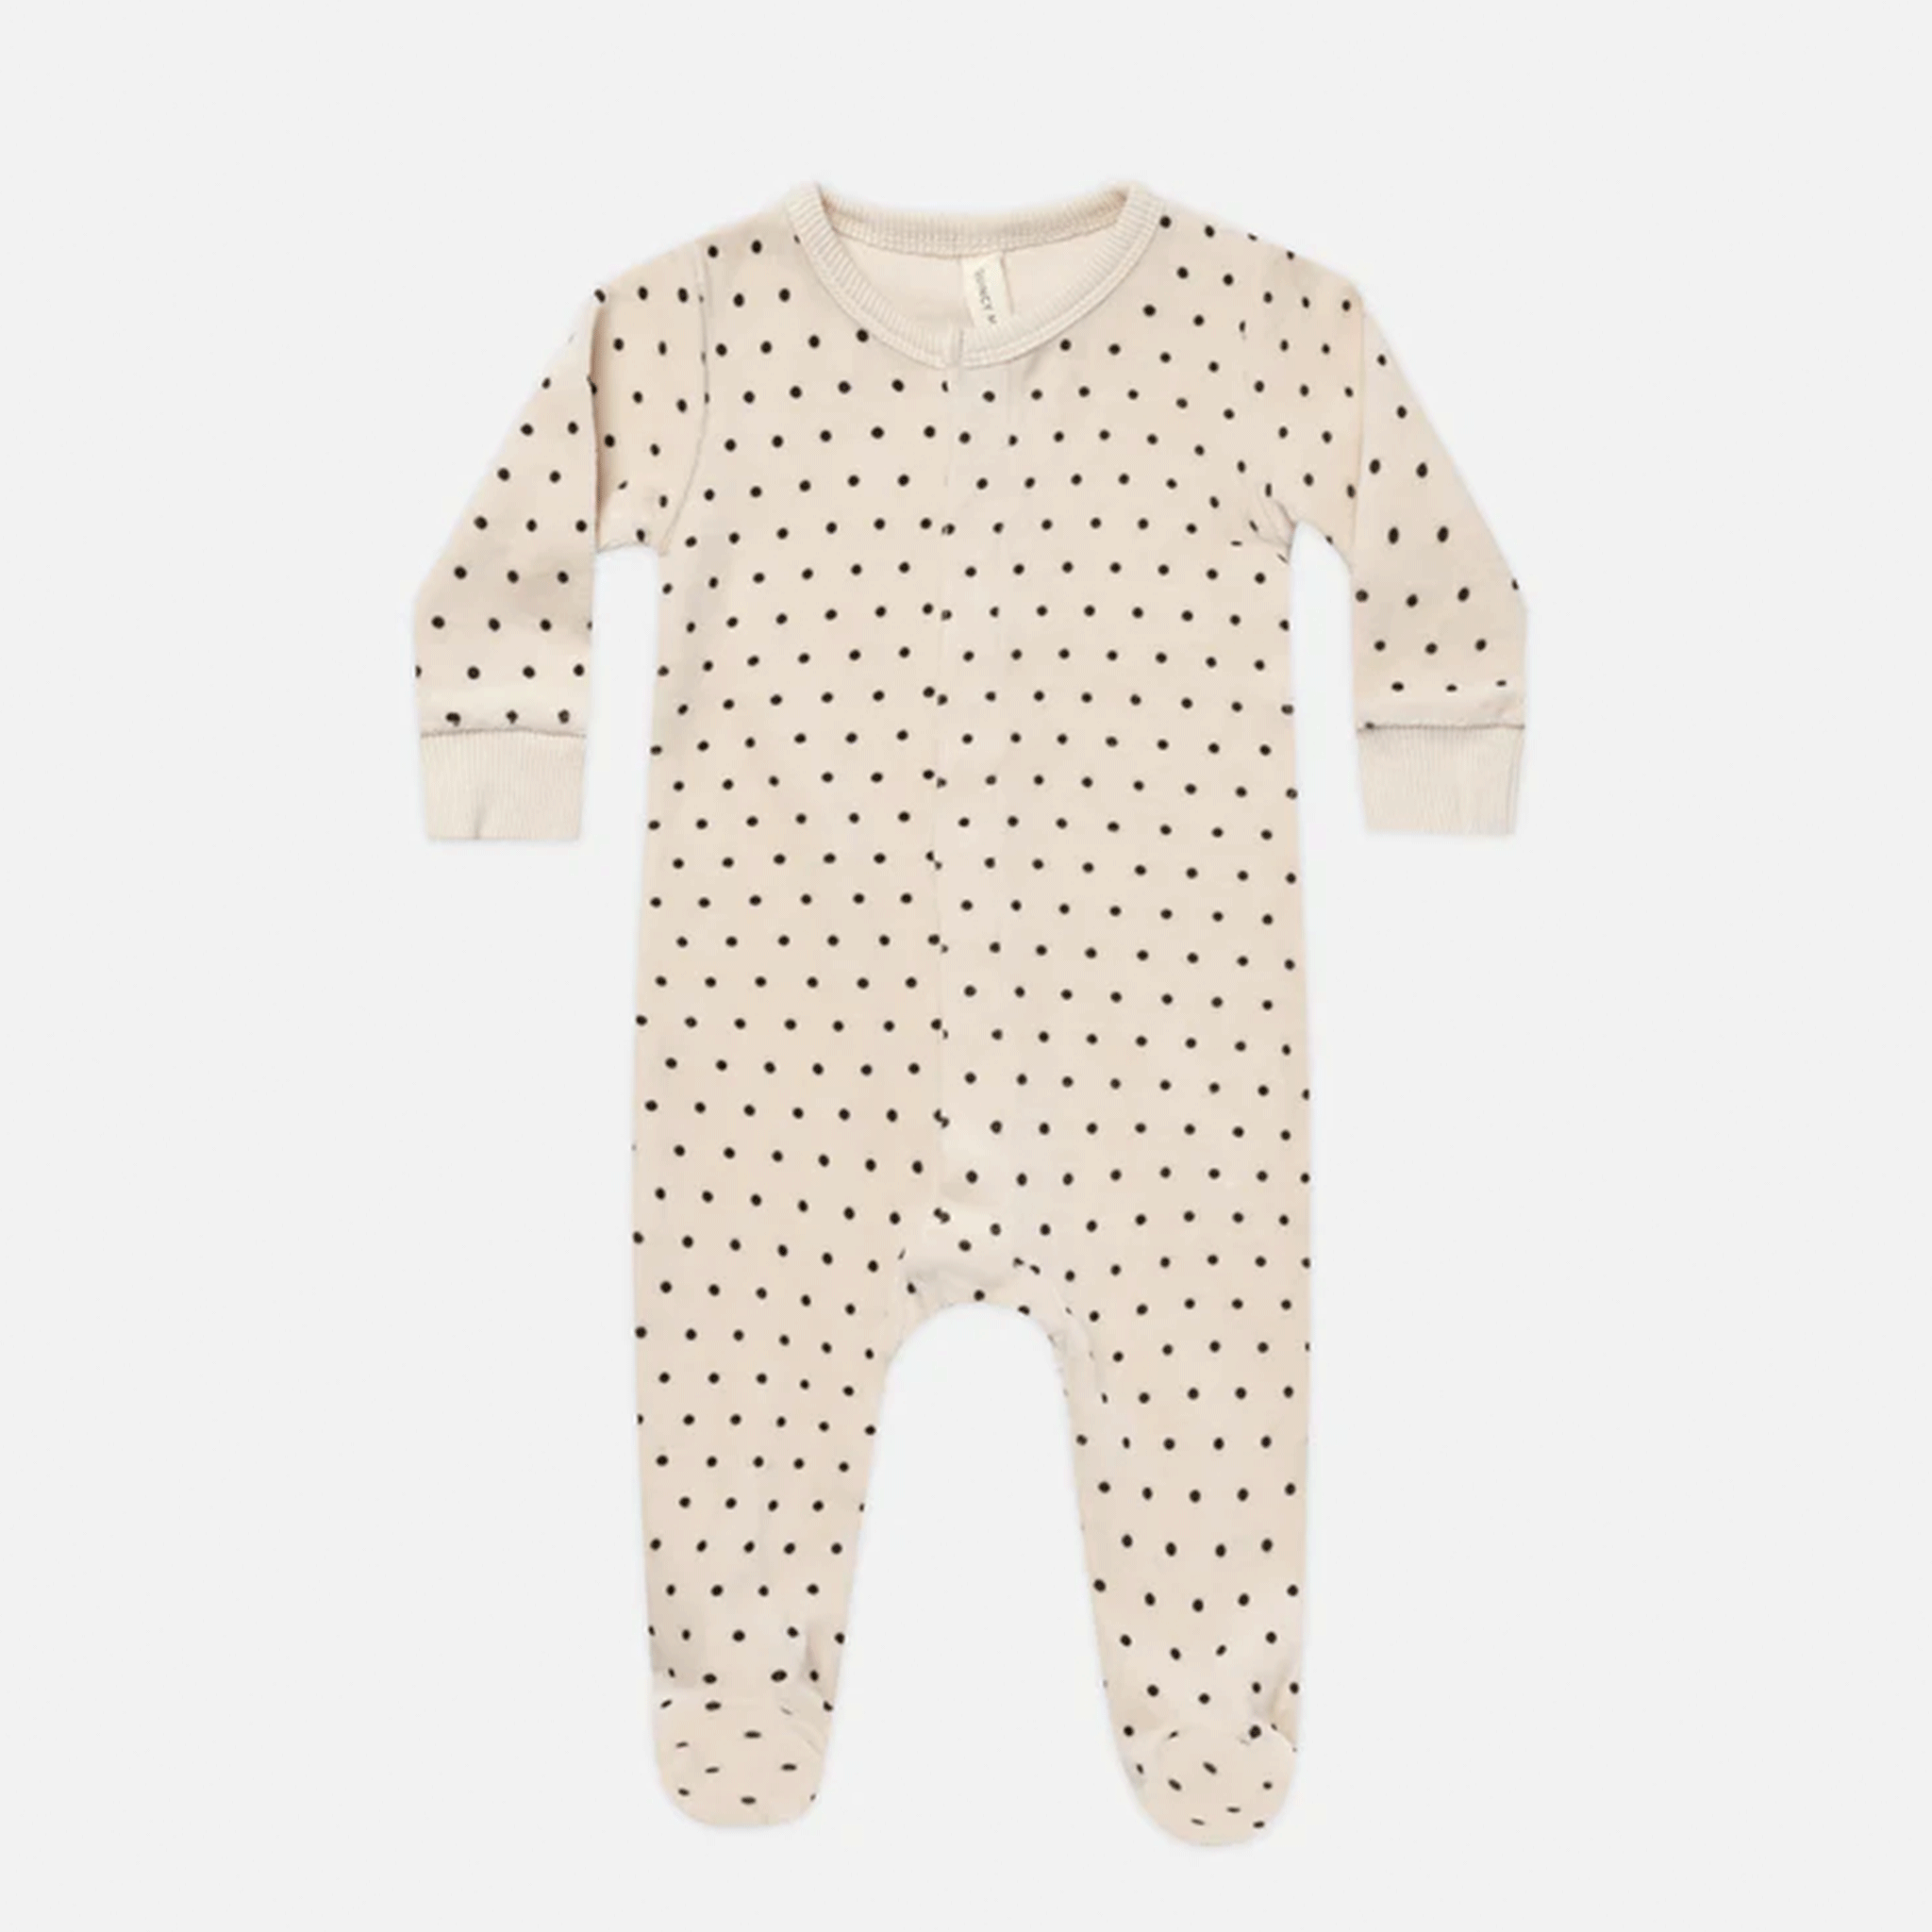 On a white background is ivory onesie pajamas with black polka dots. 